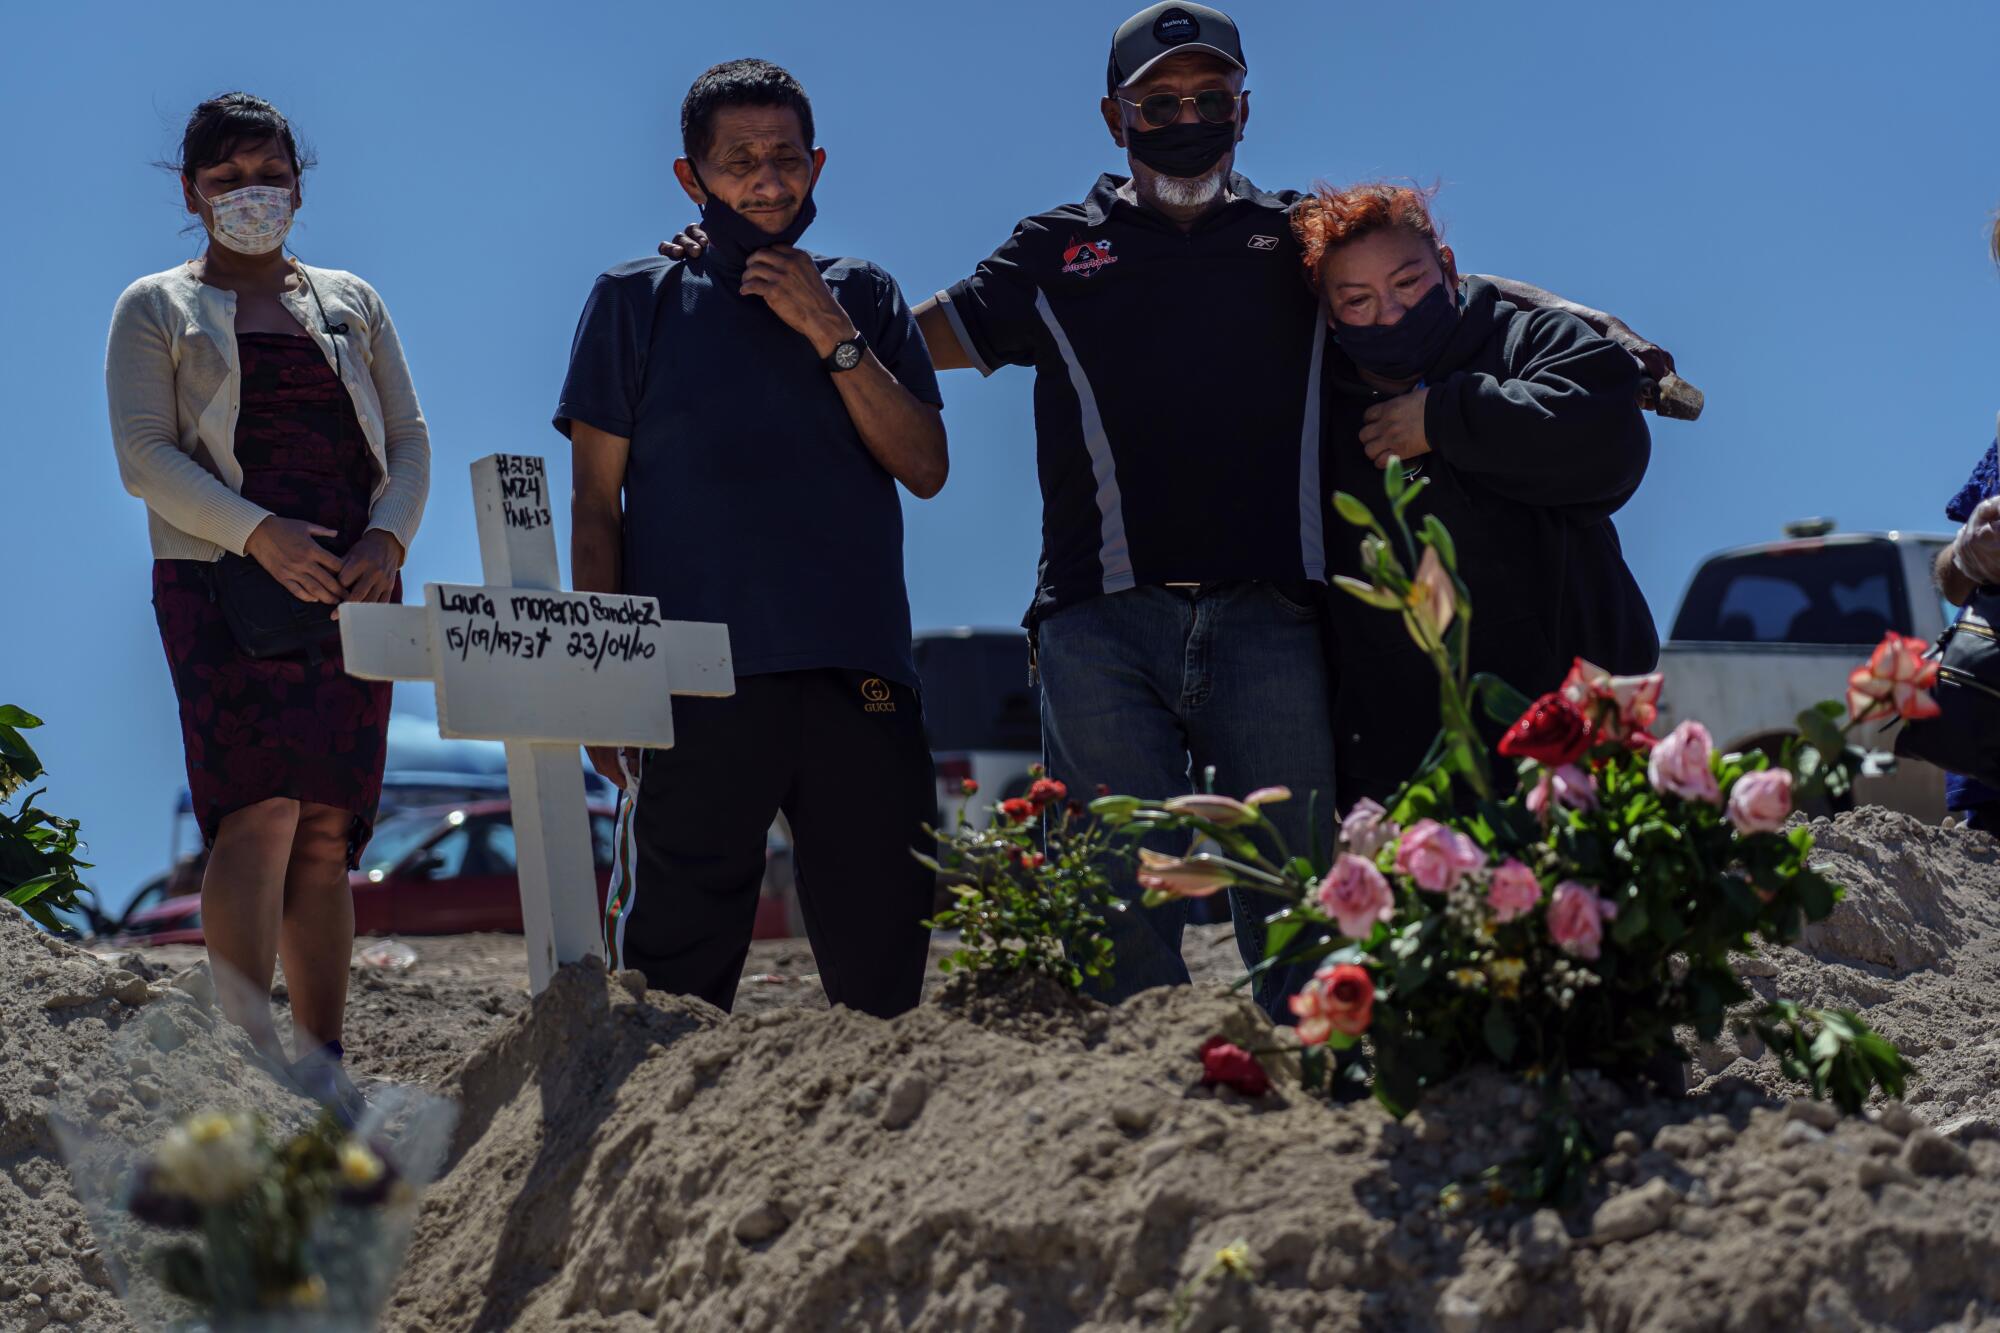 From left, Bernadina Cruz Perez, Fredy Villa Suerte Hernandez, Dominguez Hernandez, and Cleotilde Hernandez mourn the death of Laura Moreno Sanchez, 49, Fredy's wife who passed away from COVID-19, at the municipal pantheon number 13 cemetery in Tijuana, Mexico, on April 25, 2020. Fredy Villa Suerte Hernandez said that he does not know for a fact that if he is actually burying the body of his wife. He claimed that authorities did not let him open the casket. She died after being hospitalized at the Tijuana General Hospital for 11 days for COVID-19. "I don't know if it is my wife or not. I did not see the body."